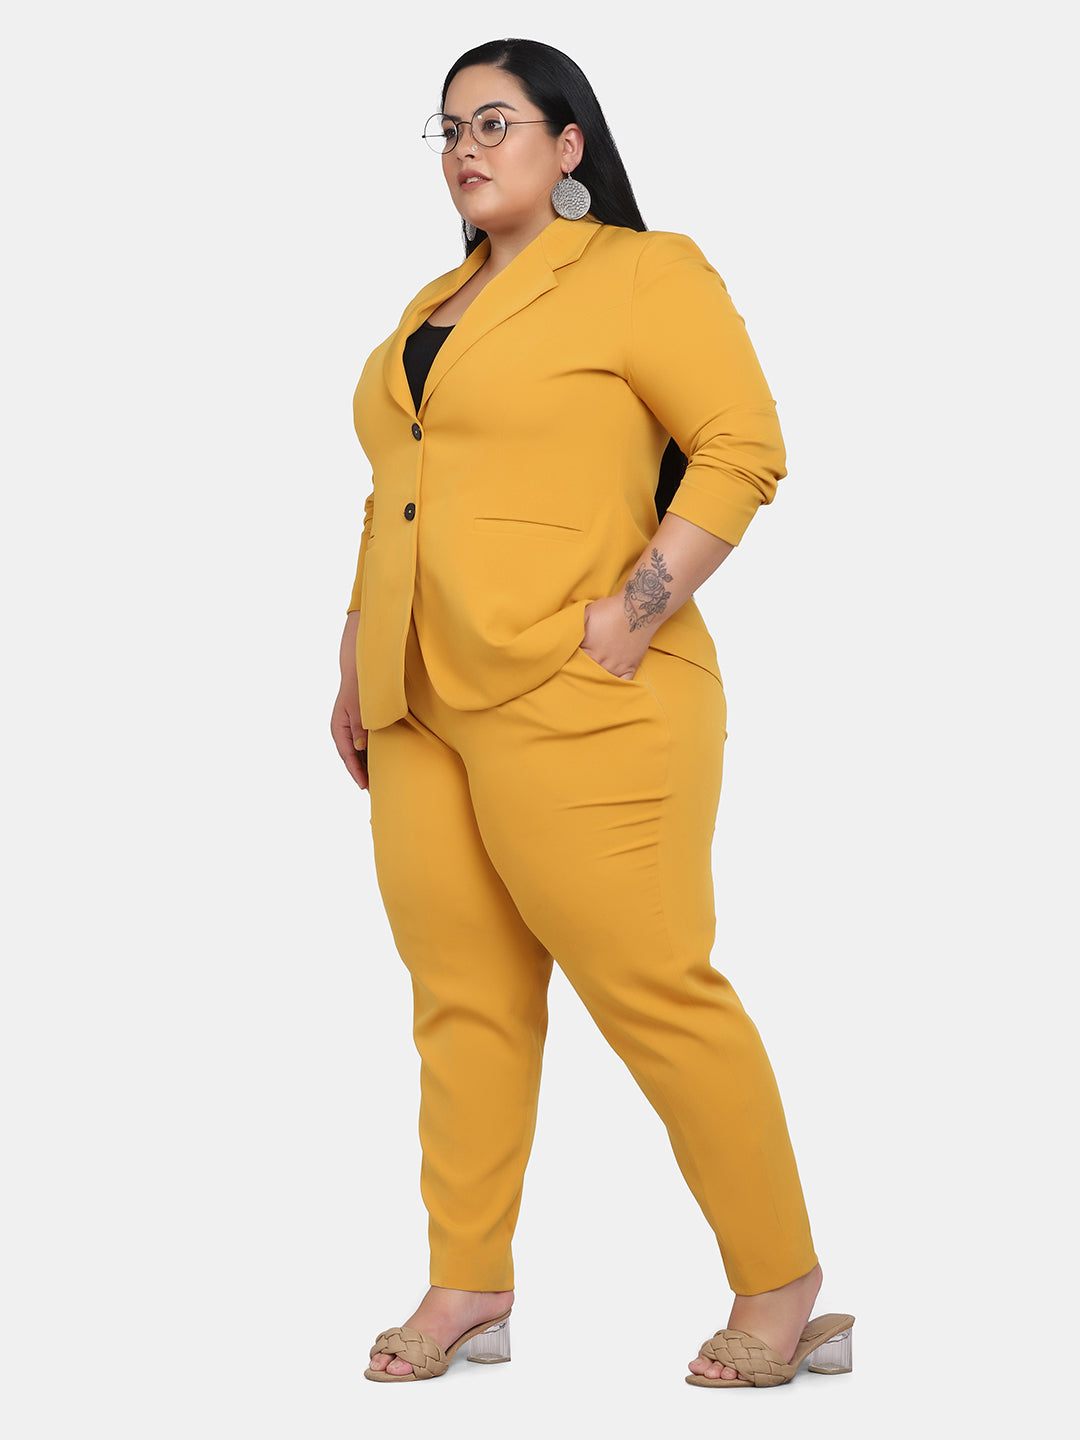 Women's Formal Pant Suit For Work- Mustard Yellow – The Ambition Collective